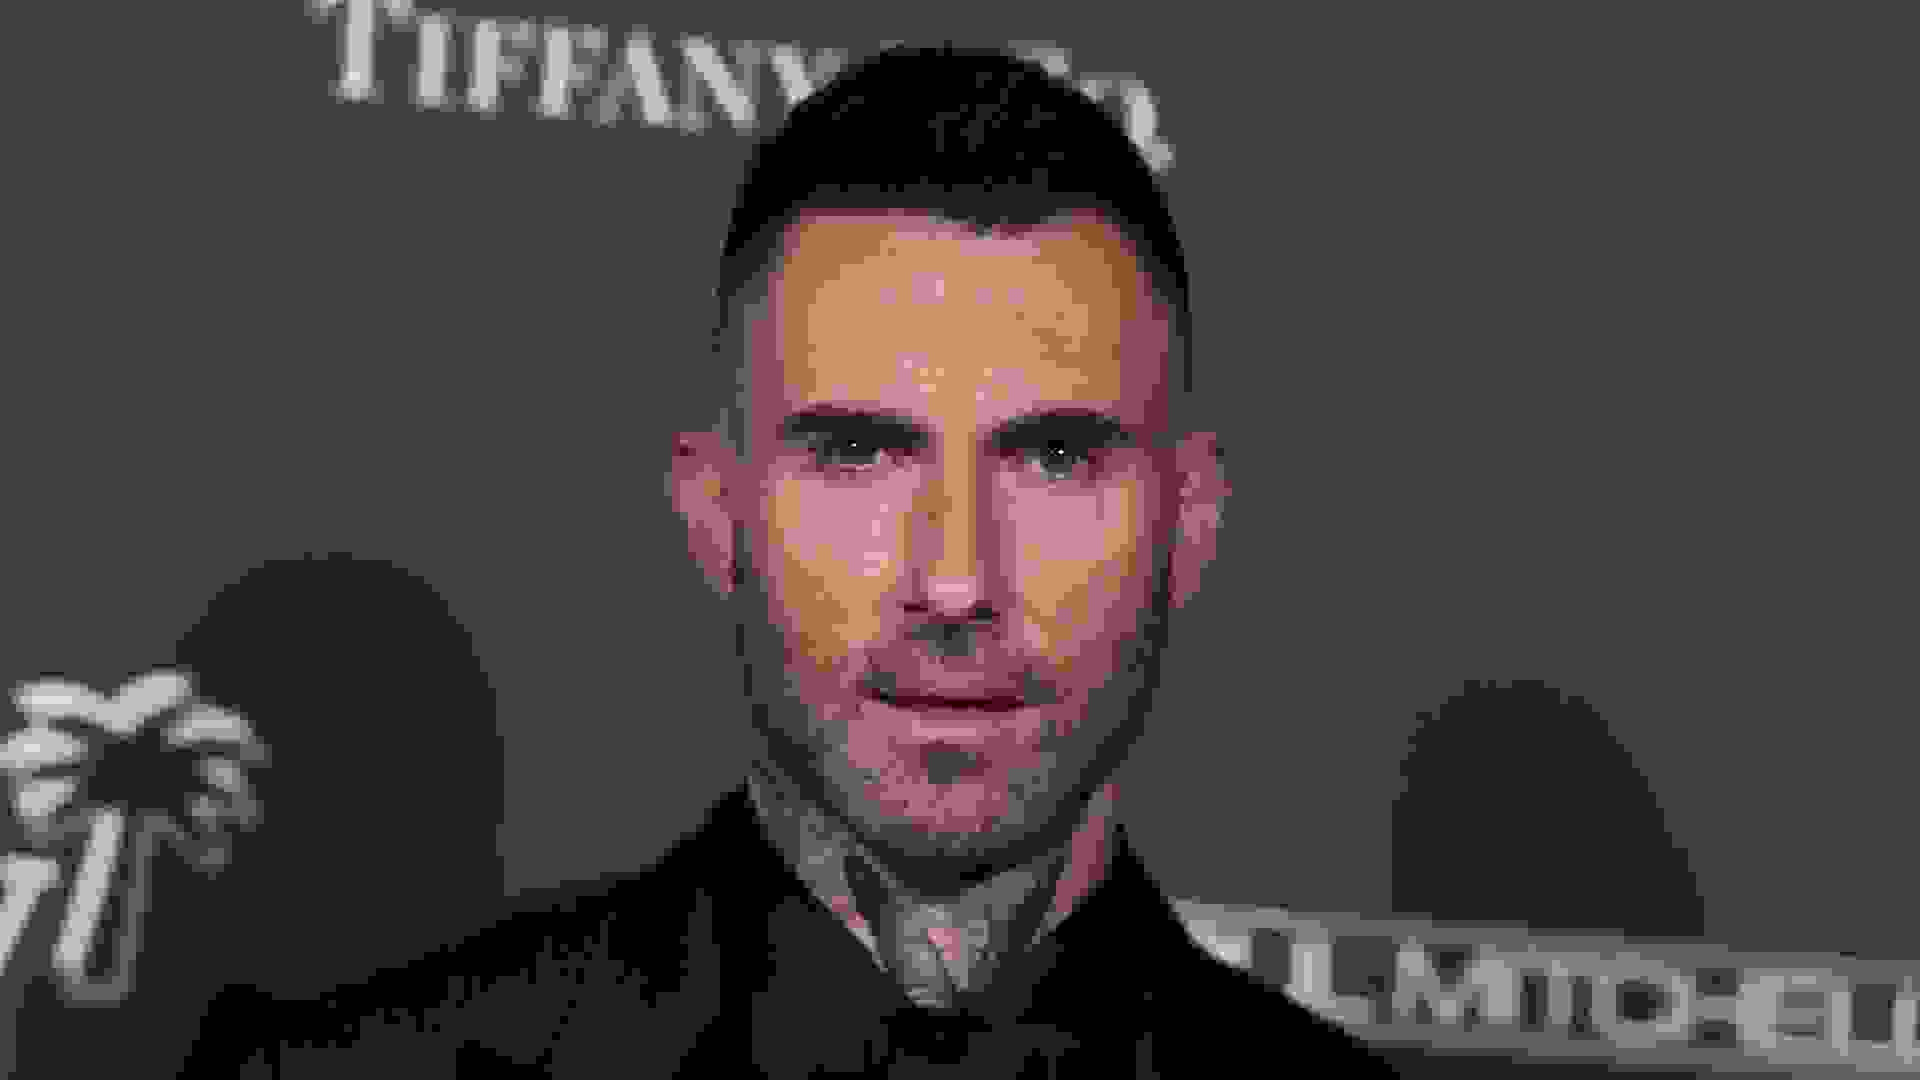 Mandatory Credit: Photo by Jordan Strauss/Invision/AP/Shutterstock (12602291ao)Adam Levine arrives at the Baby2Baby Gala at the Pacific Design Center, in West Hollywood, Calif2021 Baby2Baby Gala, West Hollywood, United States - 13 Nov 2021.